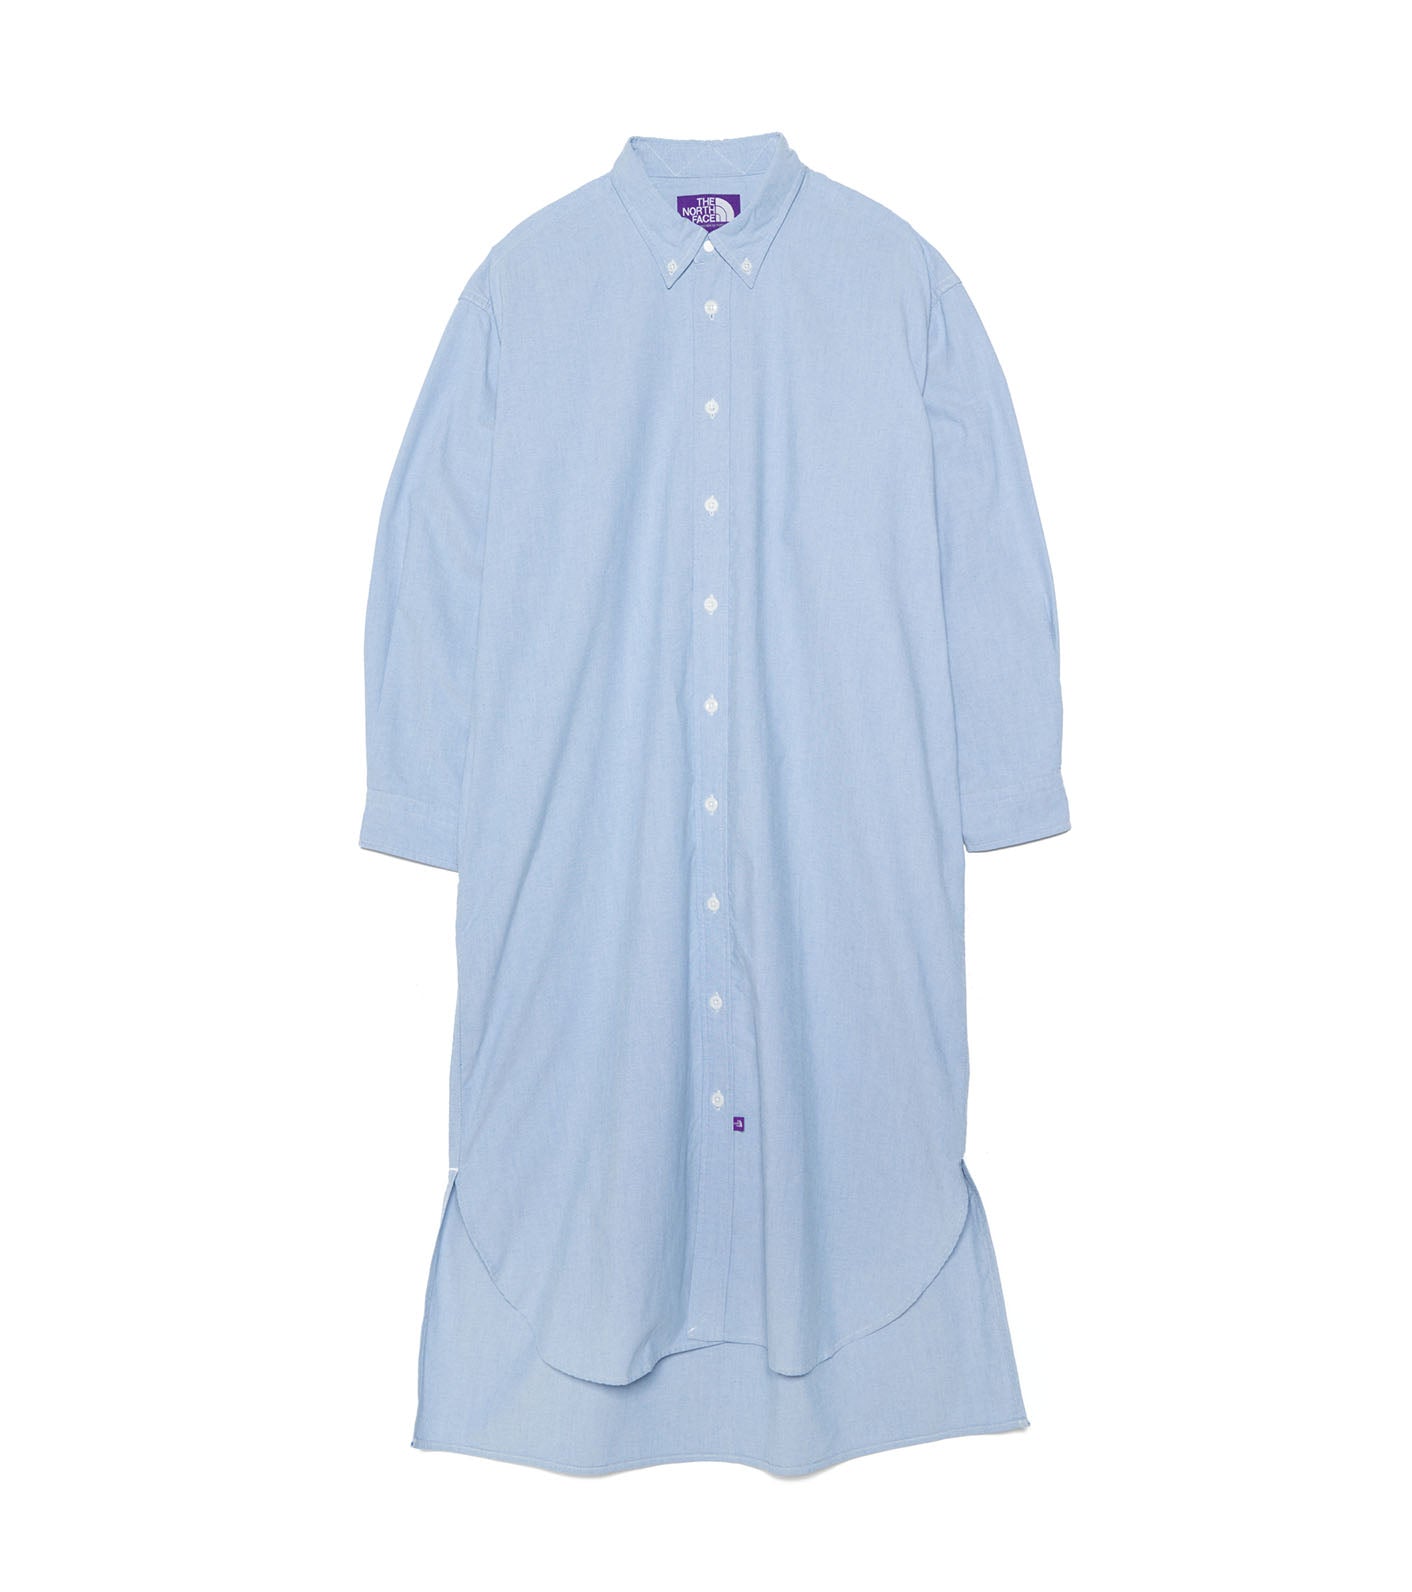 THE NORTH FACE PURPLE LABEL Button Down Field Shirt Dress